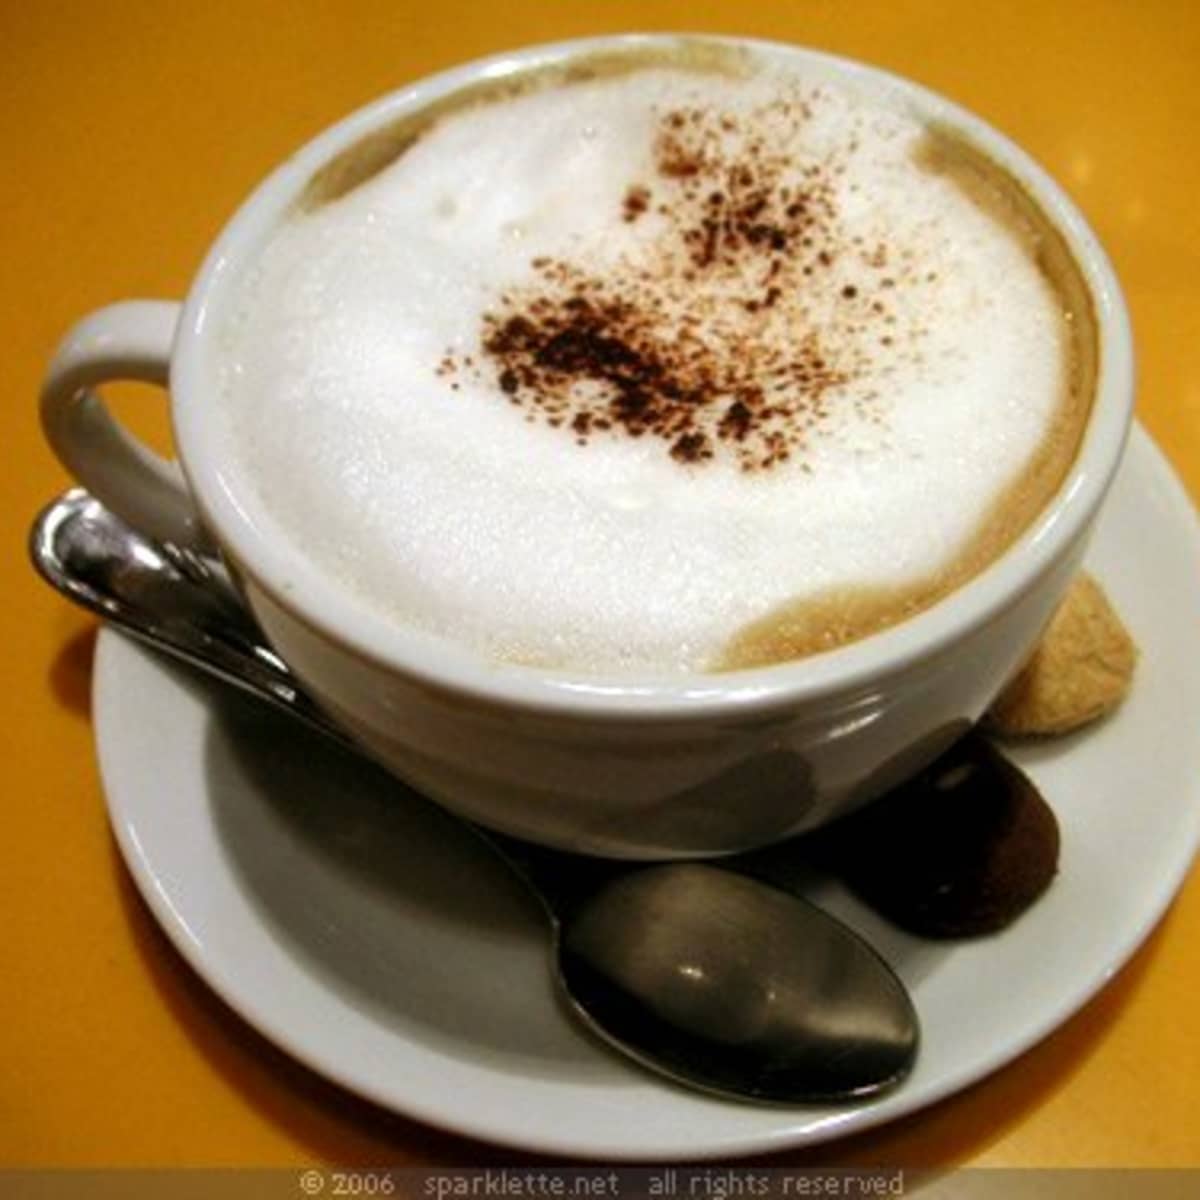 https://images.saymedia-content.com/.image/ar_1:1%2Cc_fill%2Ccs_srgb%2Cfl_progressive%2Cq_auto:eco%2Cw_1200/MTczOTIyMzkzMTgwOTM5MzI4/cappuccino-moccacino-lattewhat-the-hells-the-difference.jpg